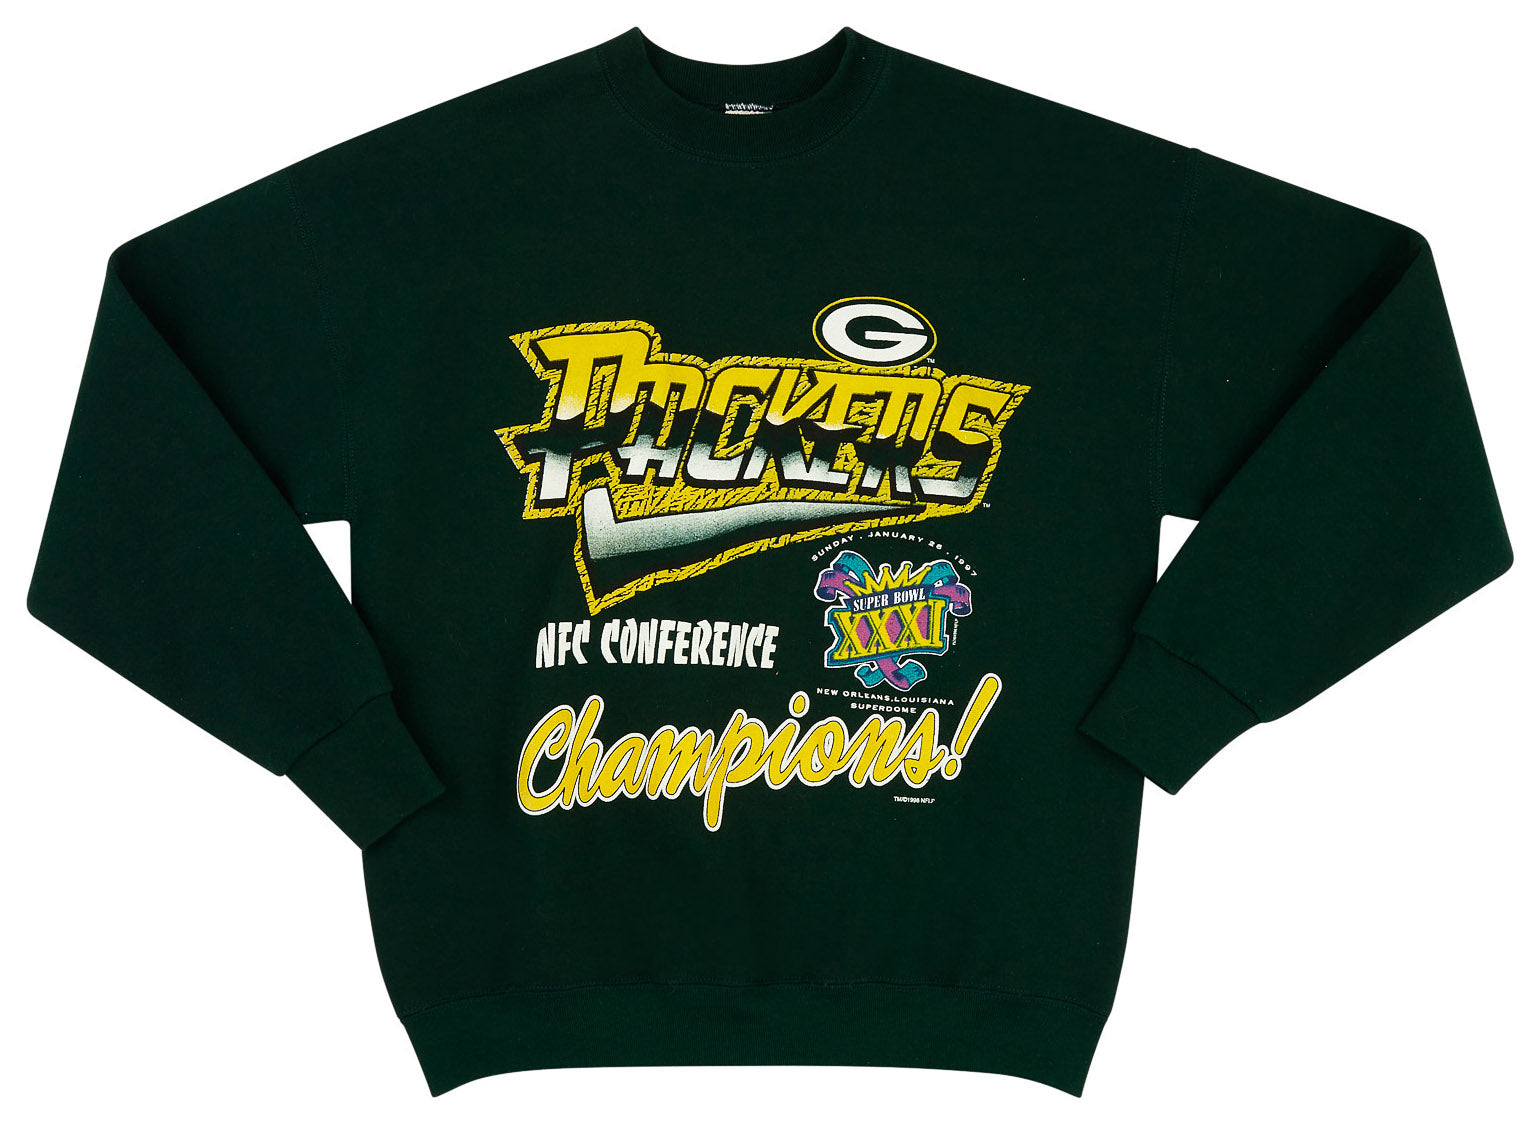 1997 GREEN BAY PACKERS NFC CONFERENCE CHAMPIONS SWEAT TOP L